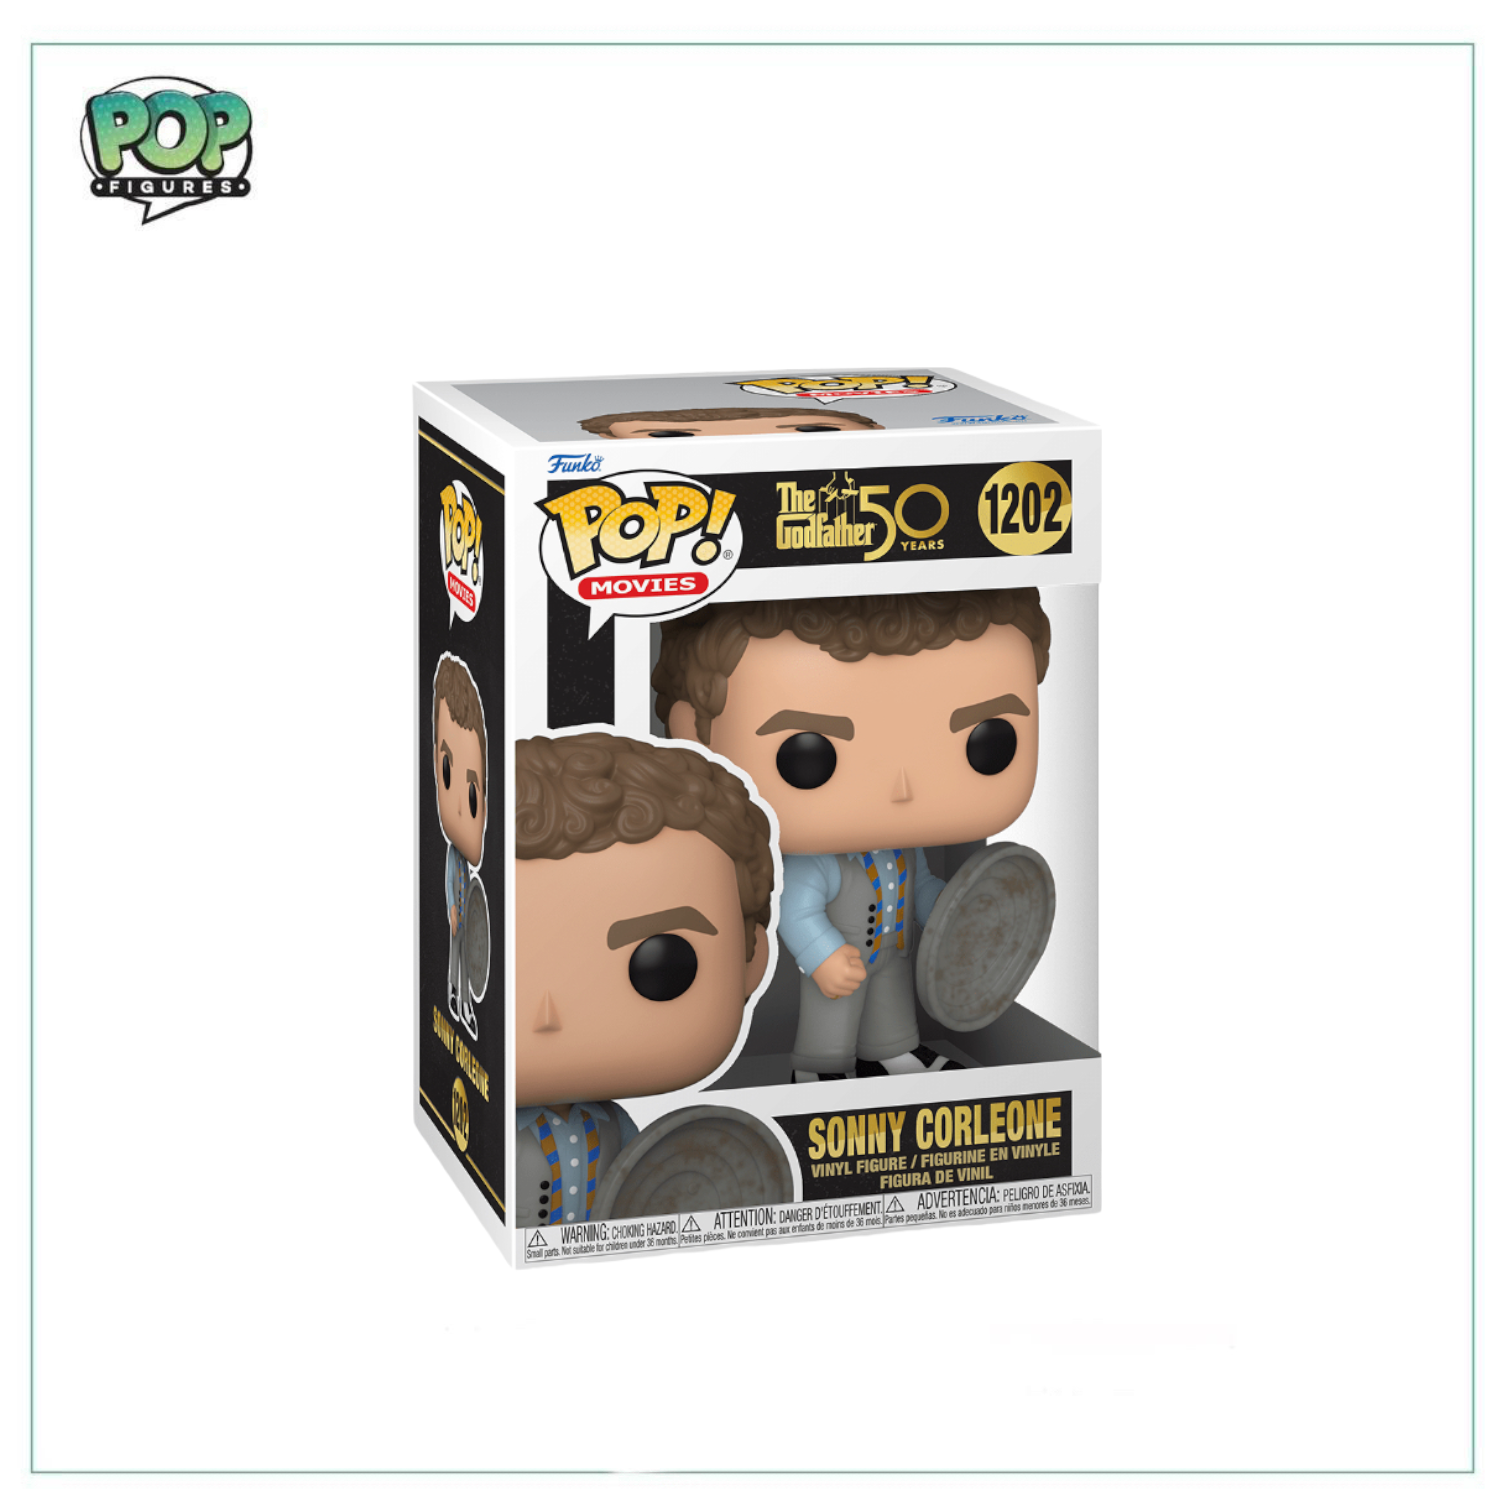 Sonny Corleone #1202 Funko Pop! The Godfather 50 Years!